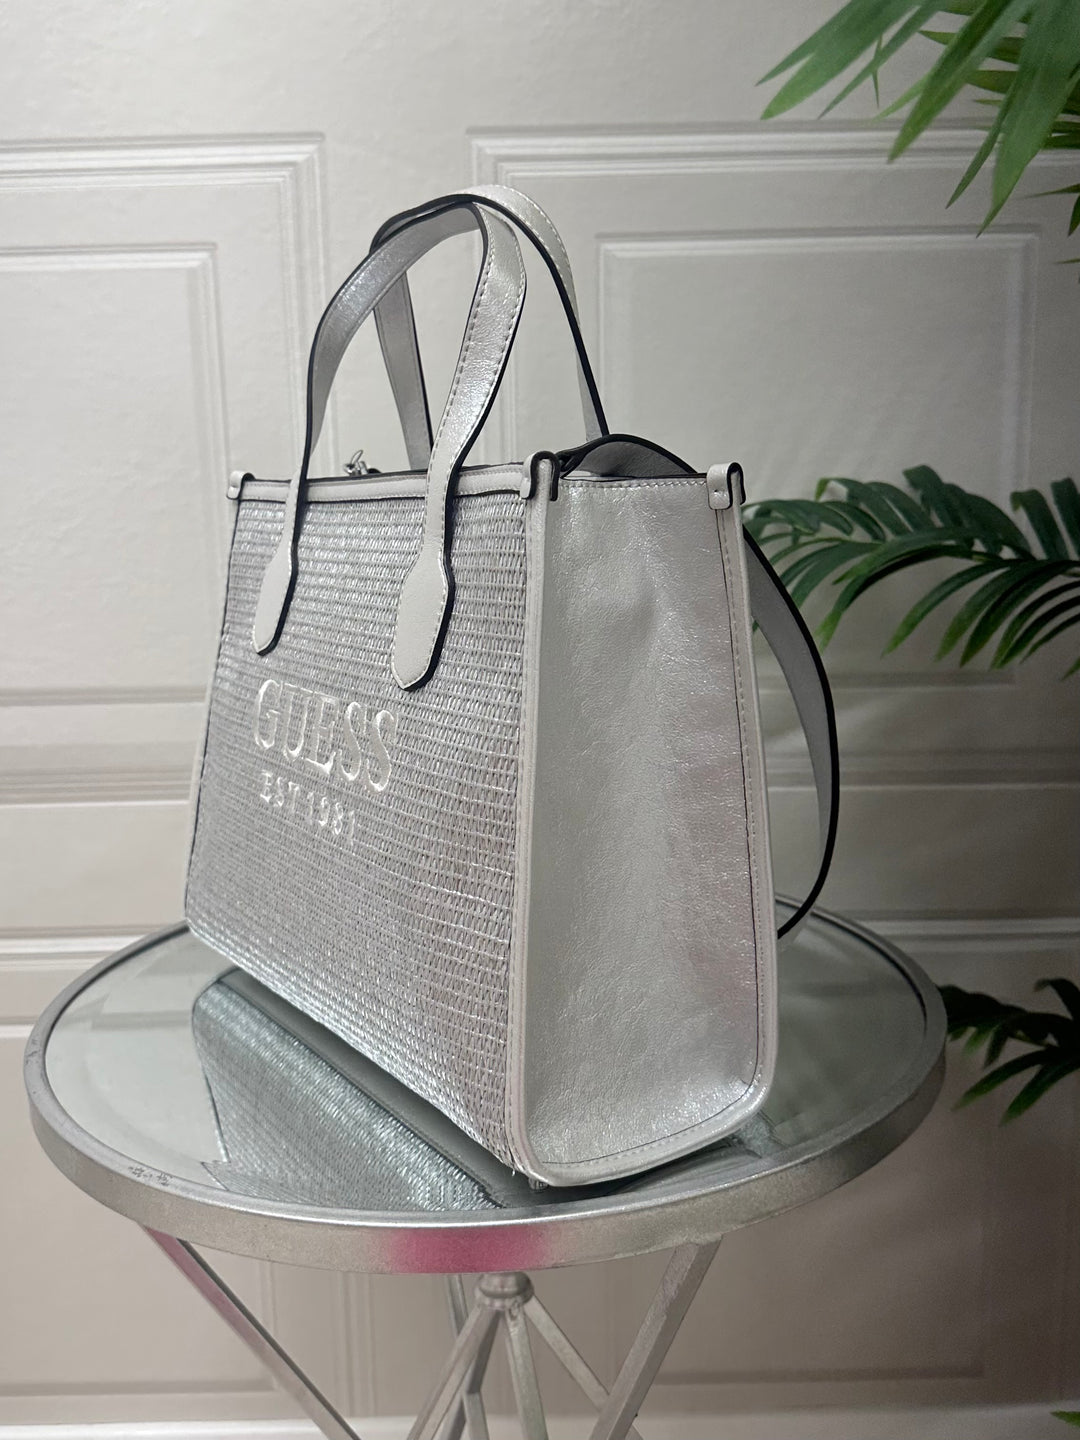 Guess Silvana Silver Compartment Tote Bag